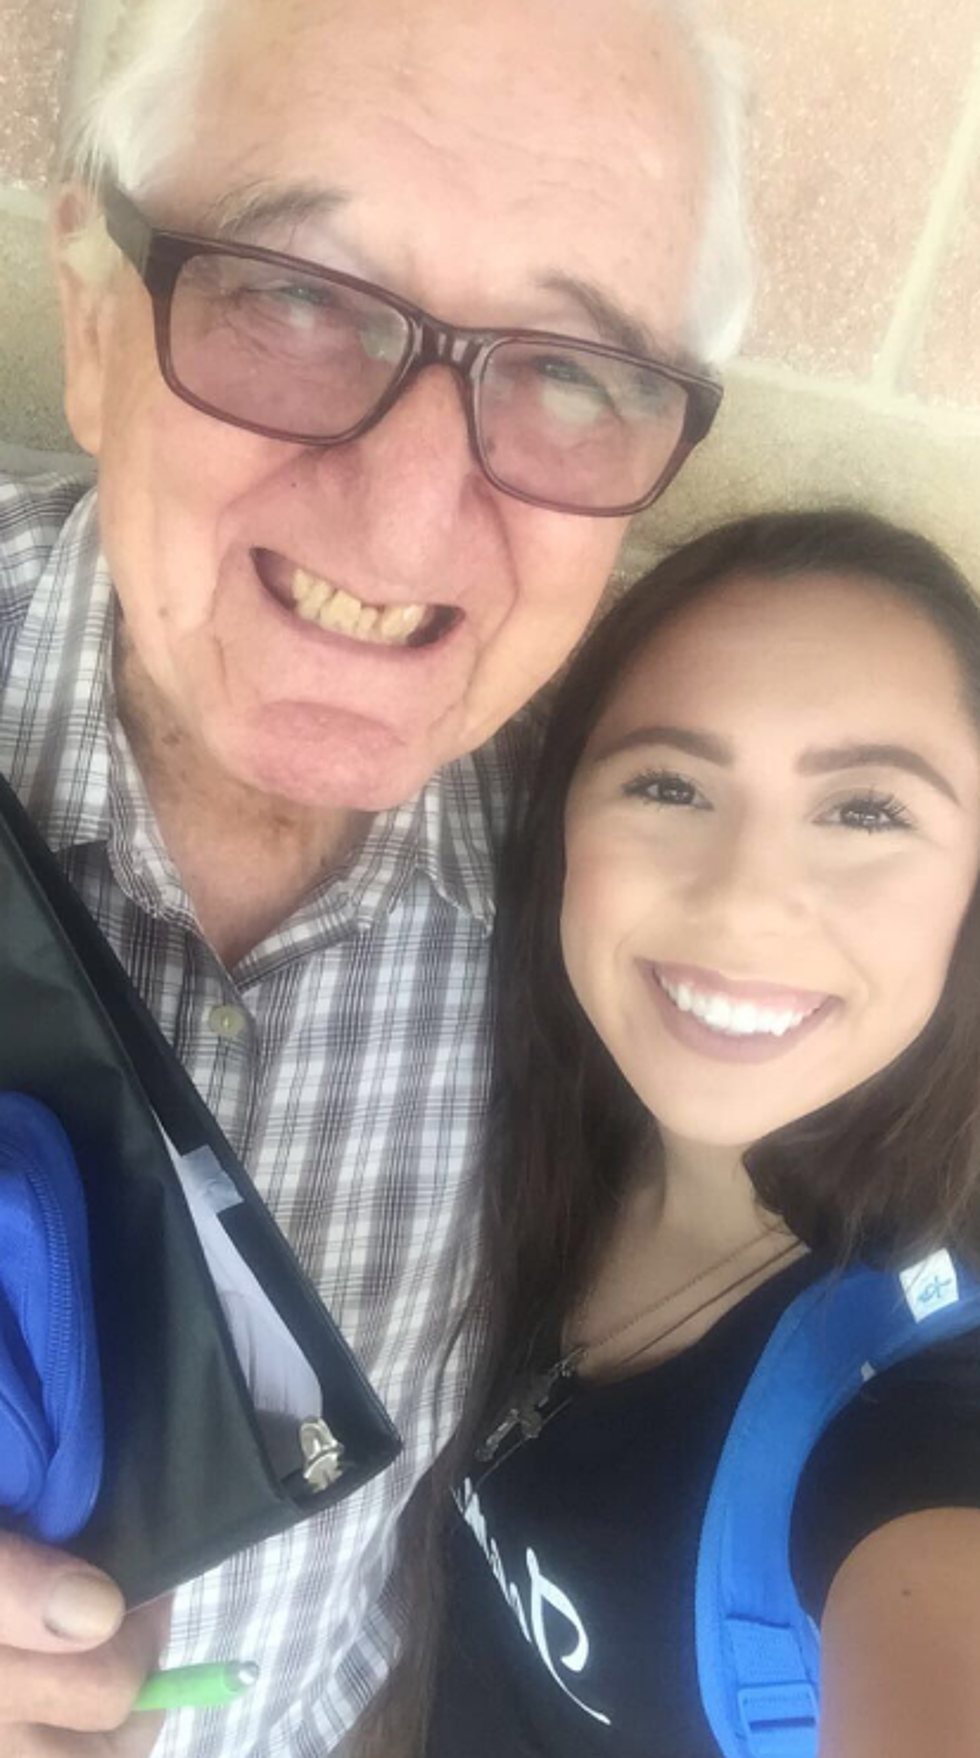 Grandfather and Granddaughter Attend Texas College Together This Semester